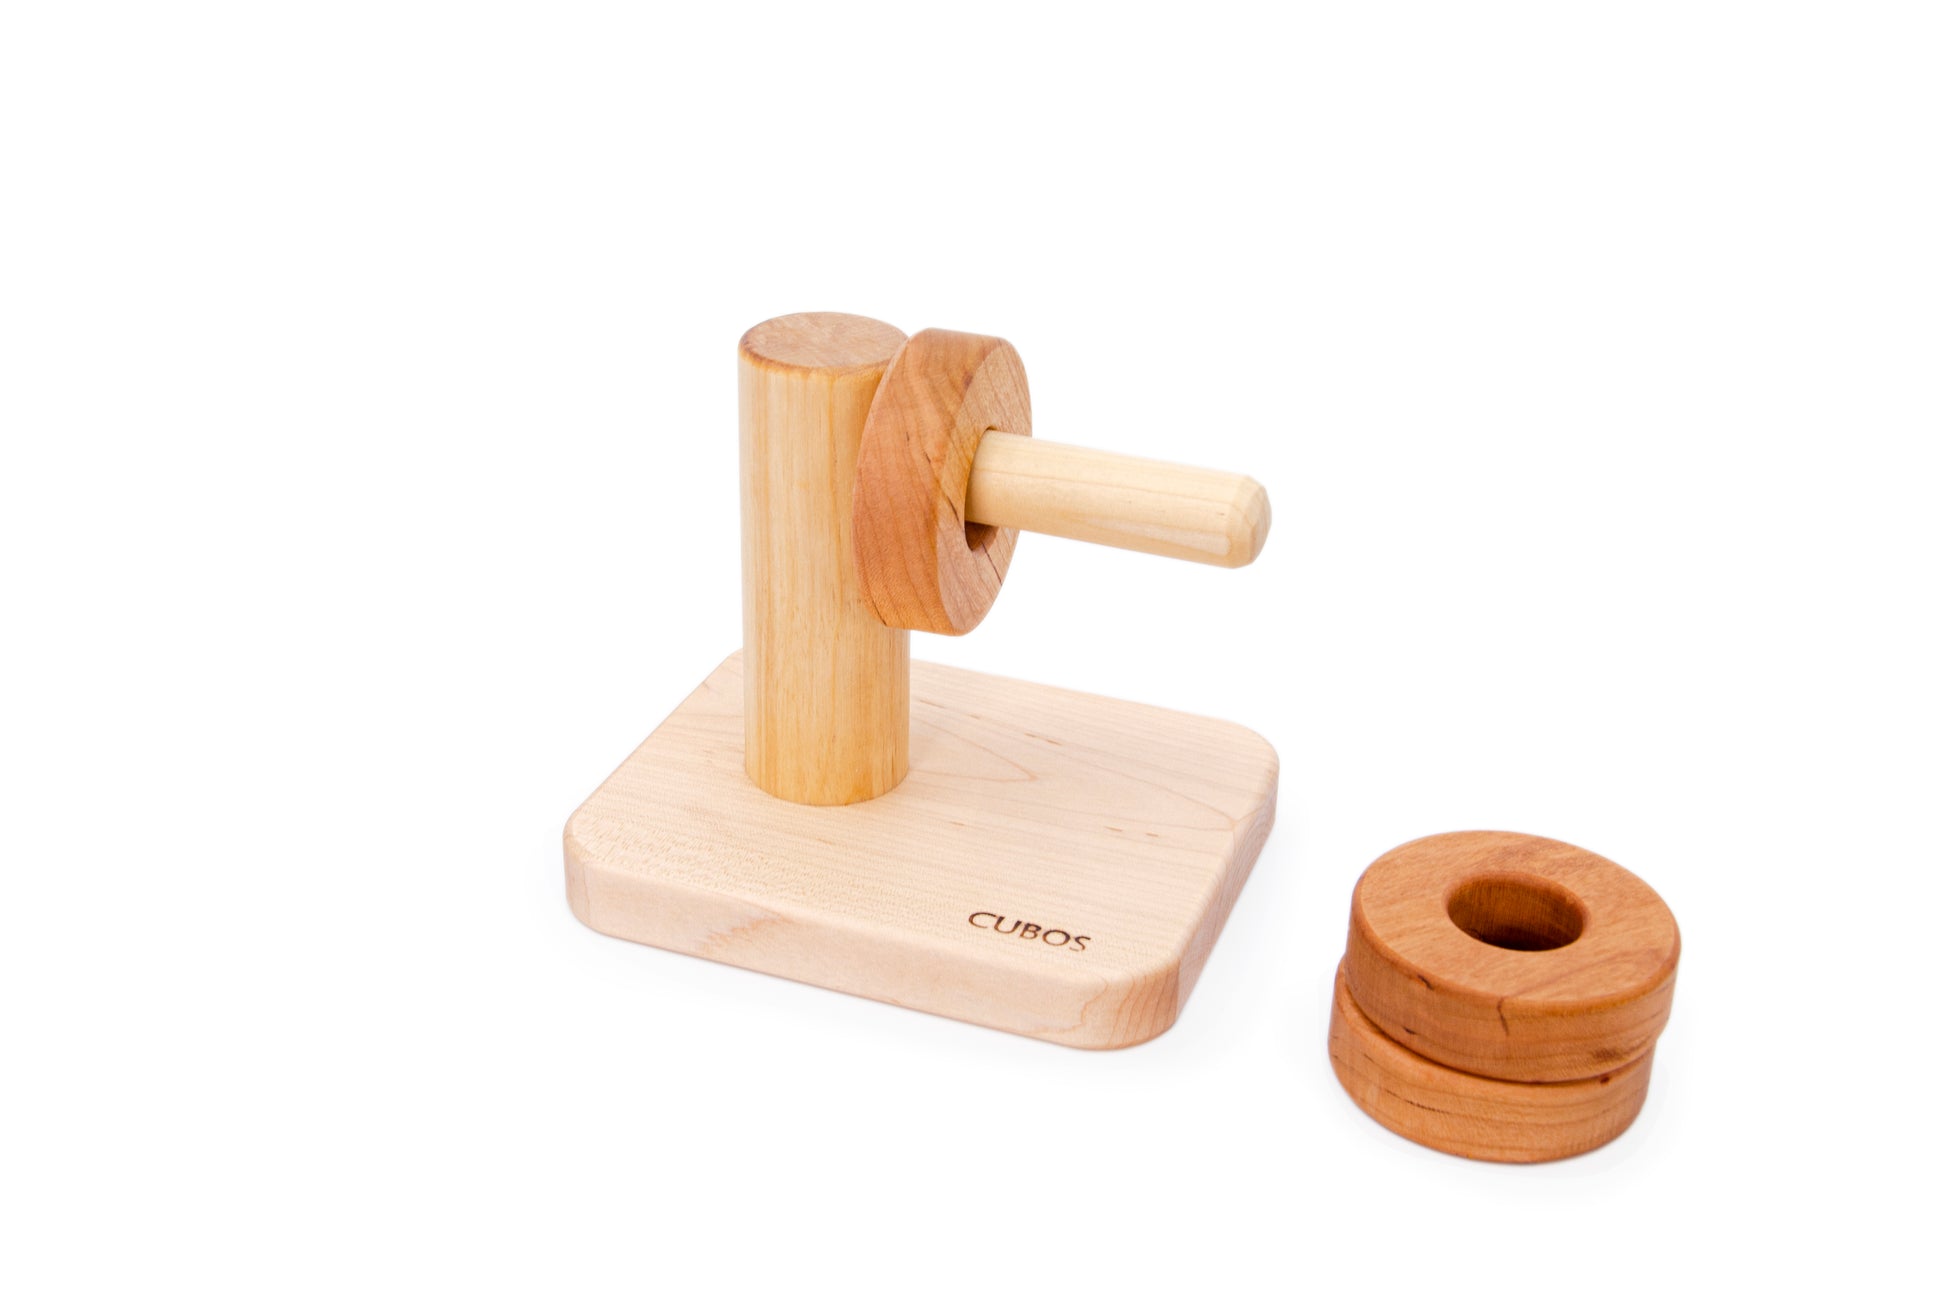 Montessori Horizontal Dowel Rings Stacker - A wooden toy featuring a horizontal dowel with rings of the same size stacked on it, made of hardwood Cherry for durability. 100% natural and finished only with Beeswax, ensuring safety and a natural touch in Montessori education.